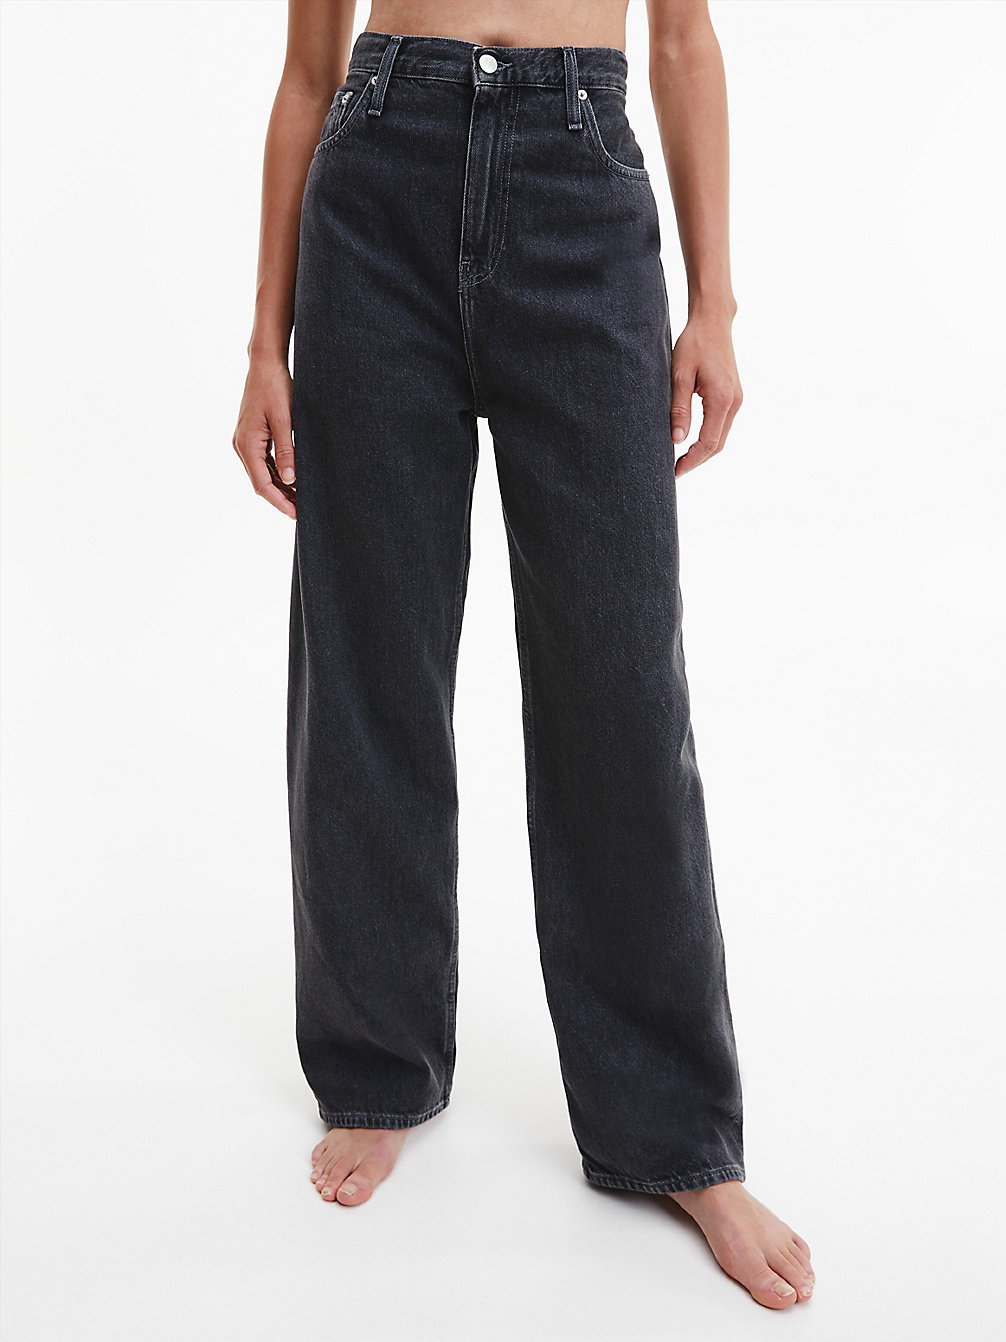 High Rise Relaxed Jeans > DENIM GREY > undefined donna > Calvin Klein